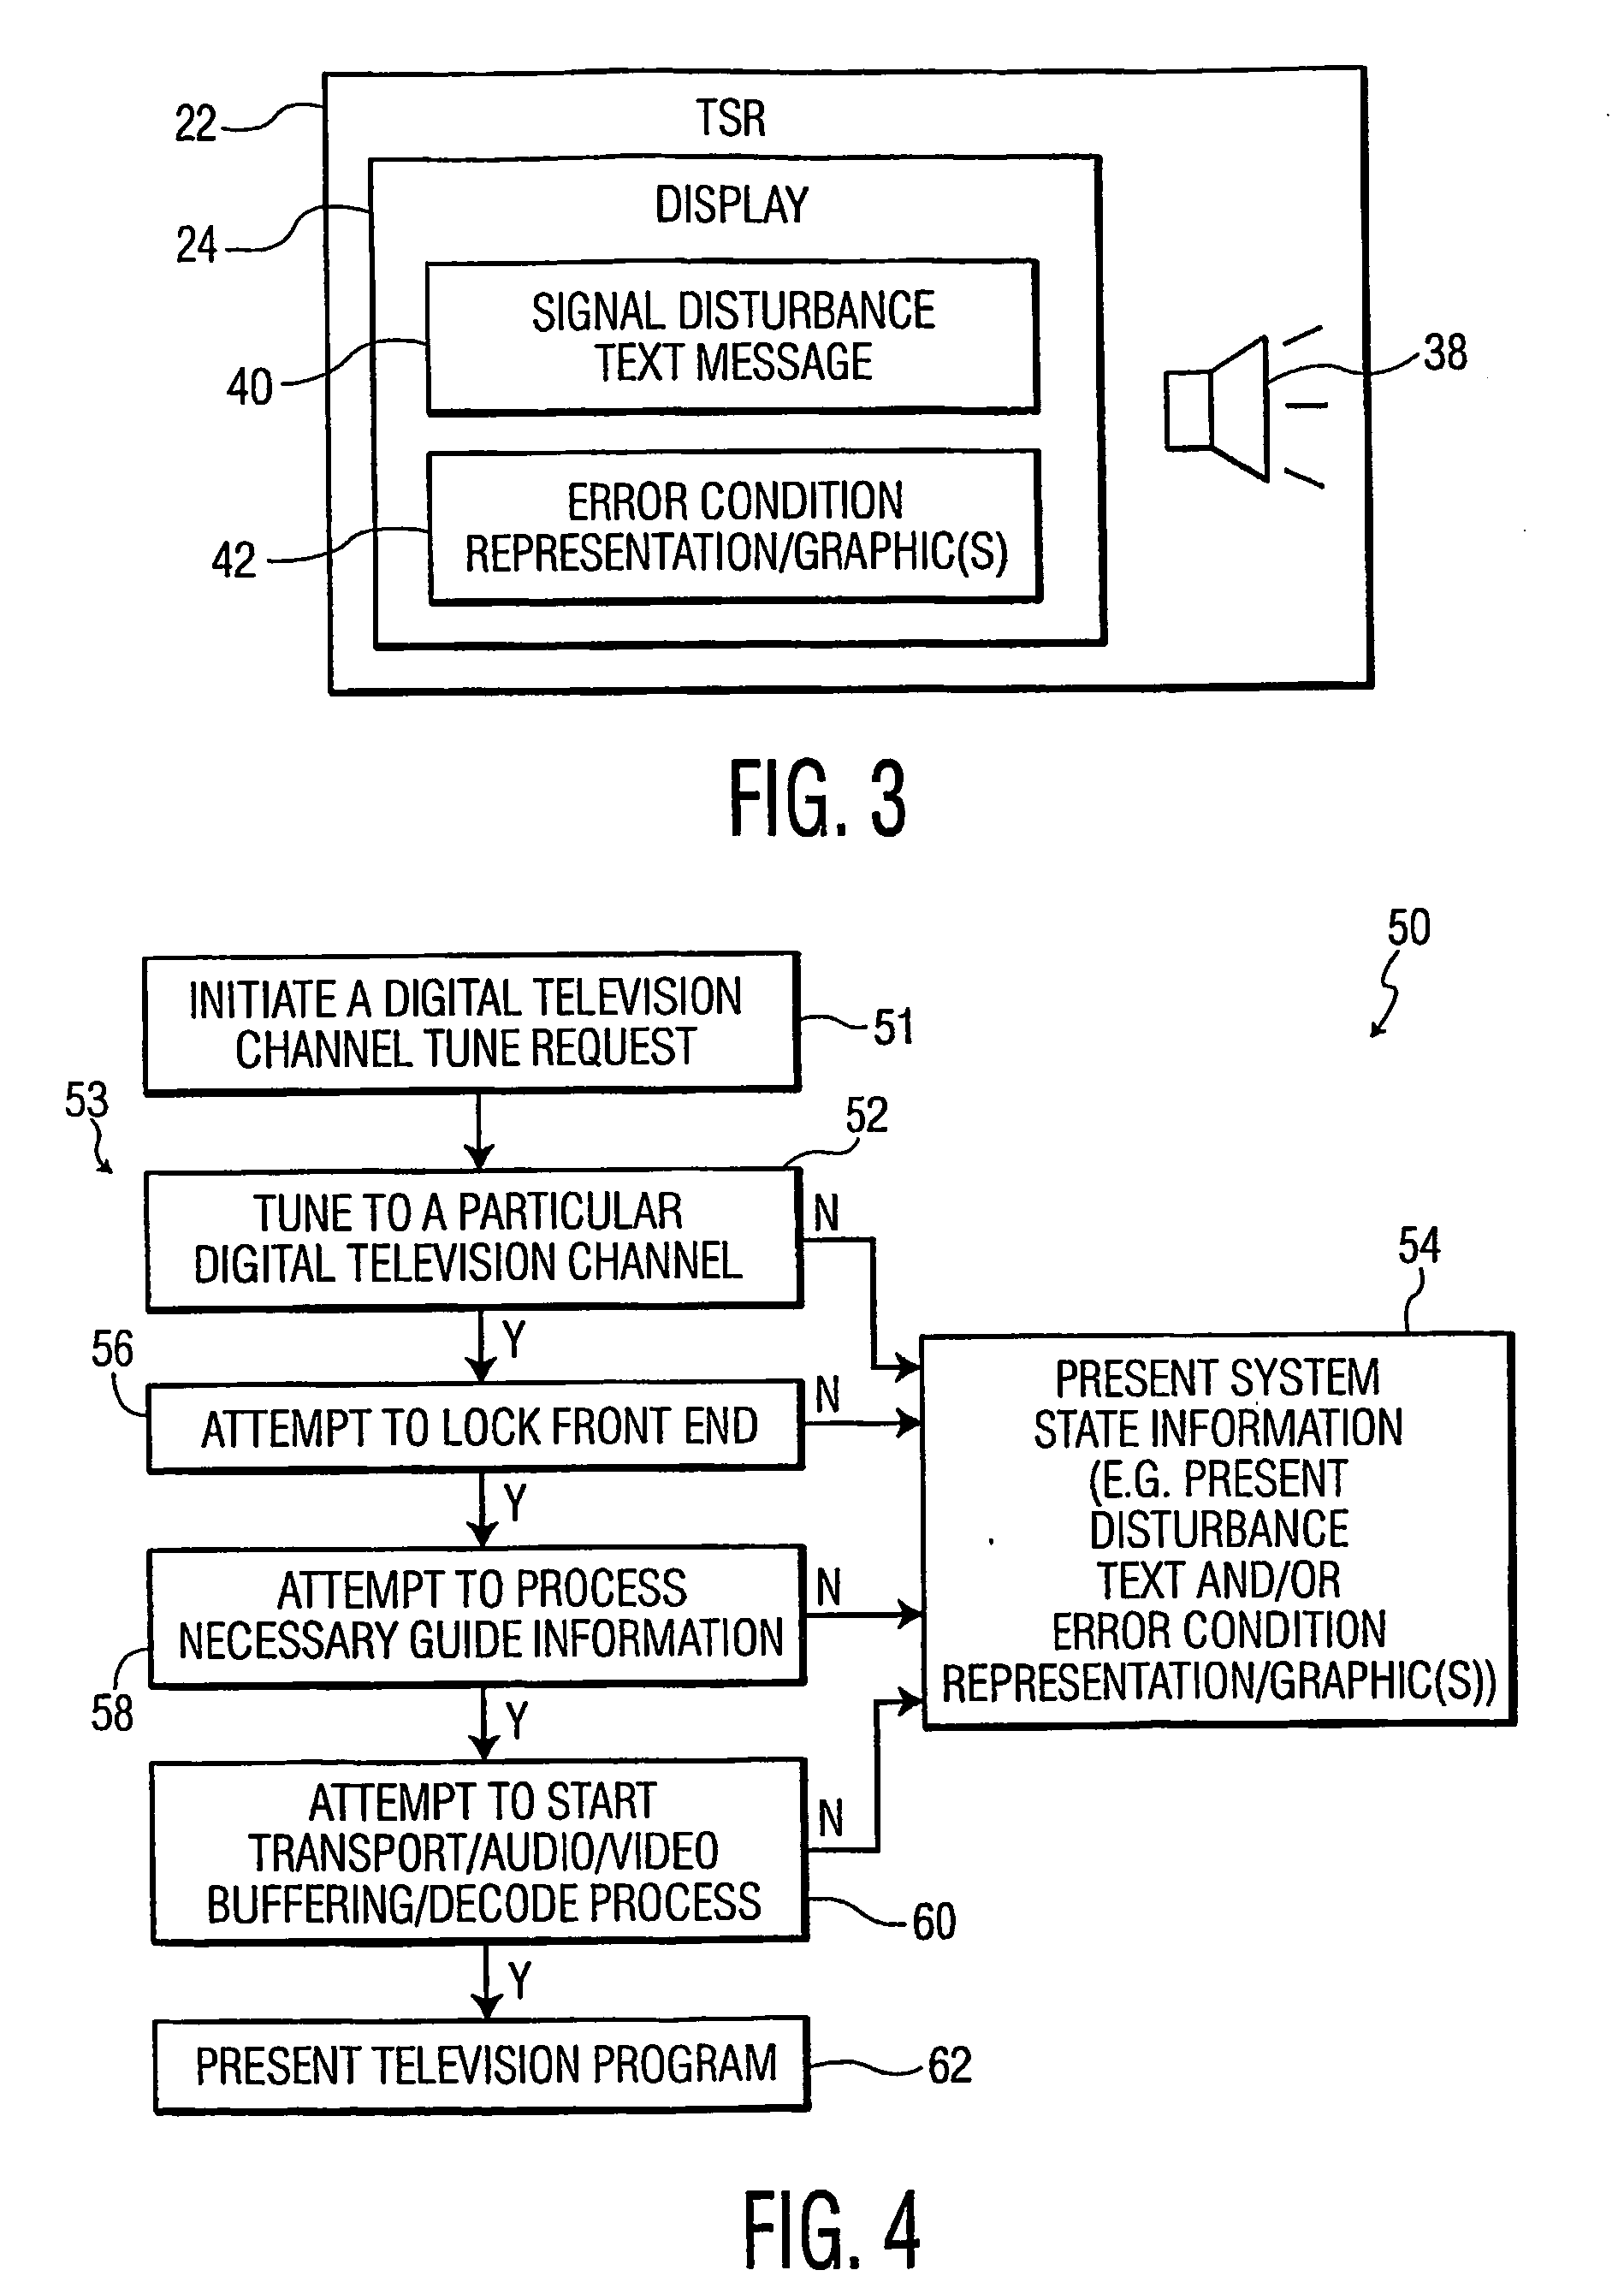 Automatic signal error display and user guided signal recovery in a digital television signal receiver